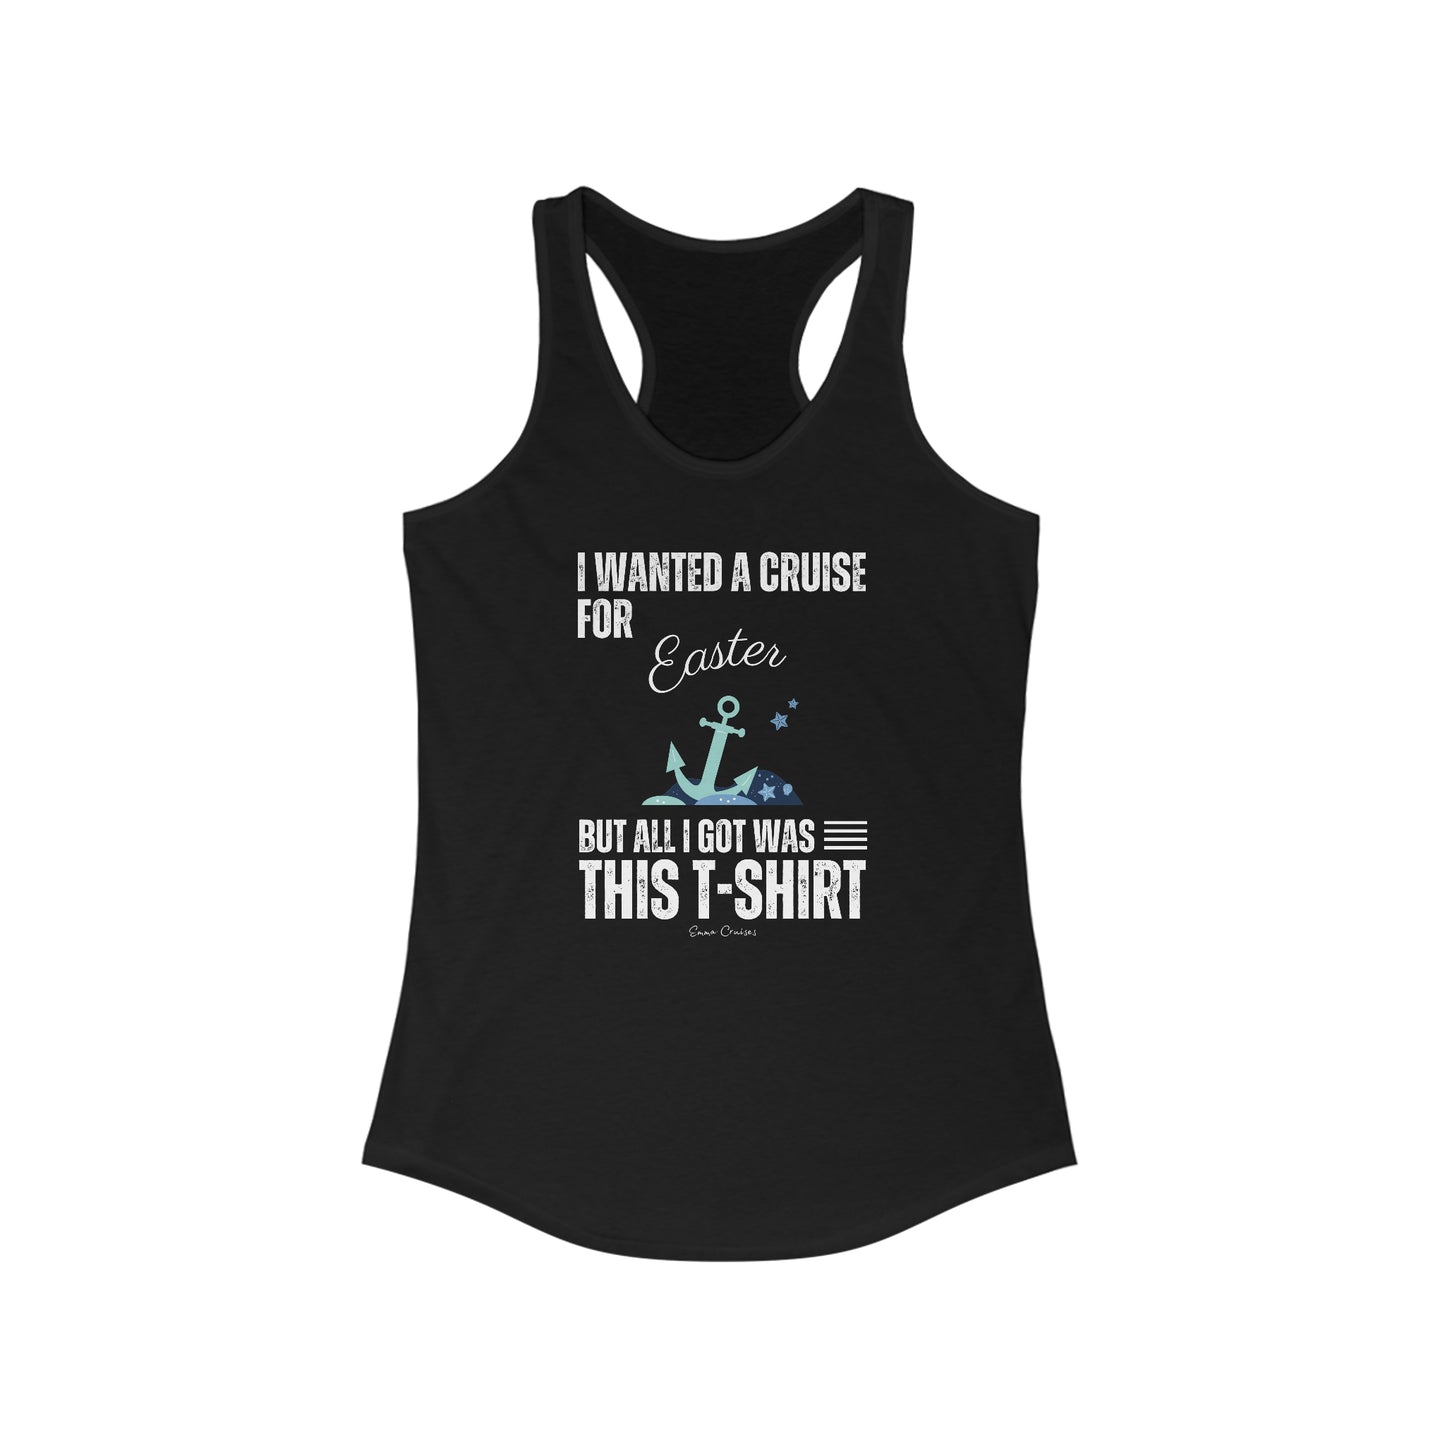 I Wanted a Cruise for Easter - Tank Top